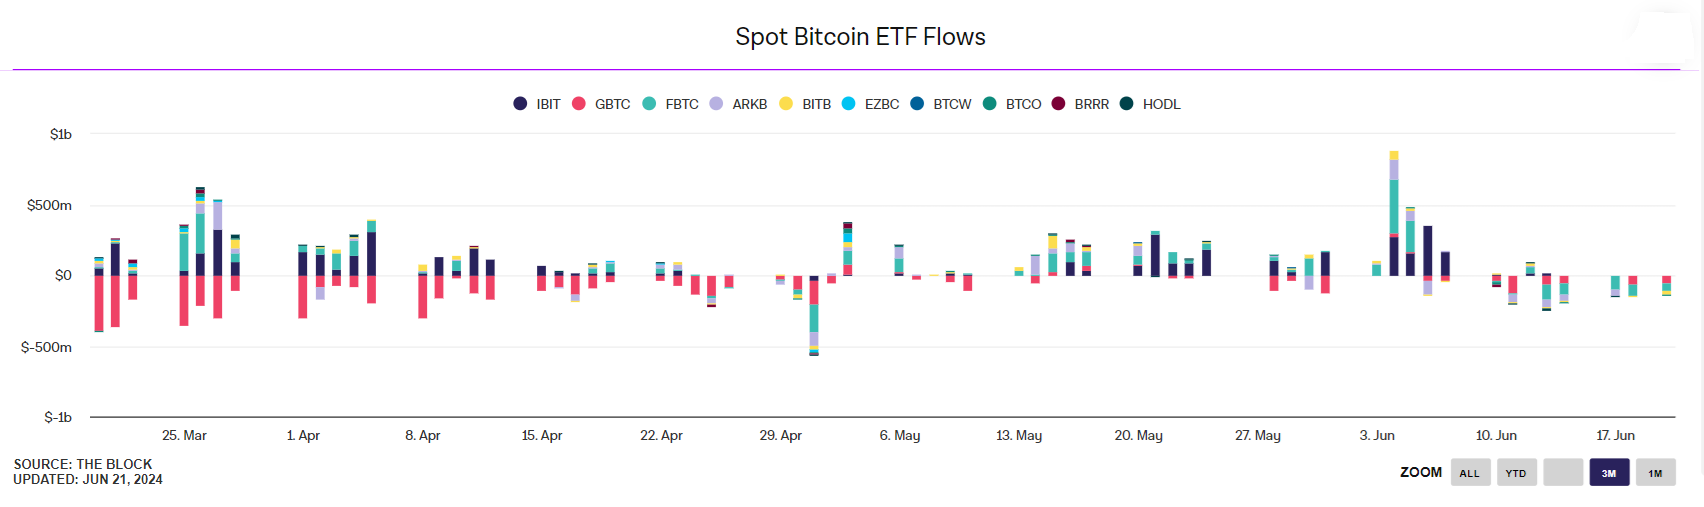 Market research report: Bitcoin falls towards 60k, US stocks reach ATHs, led by AI - eft flows